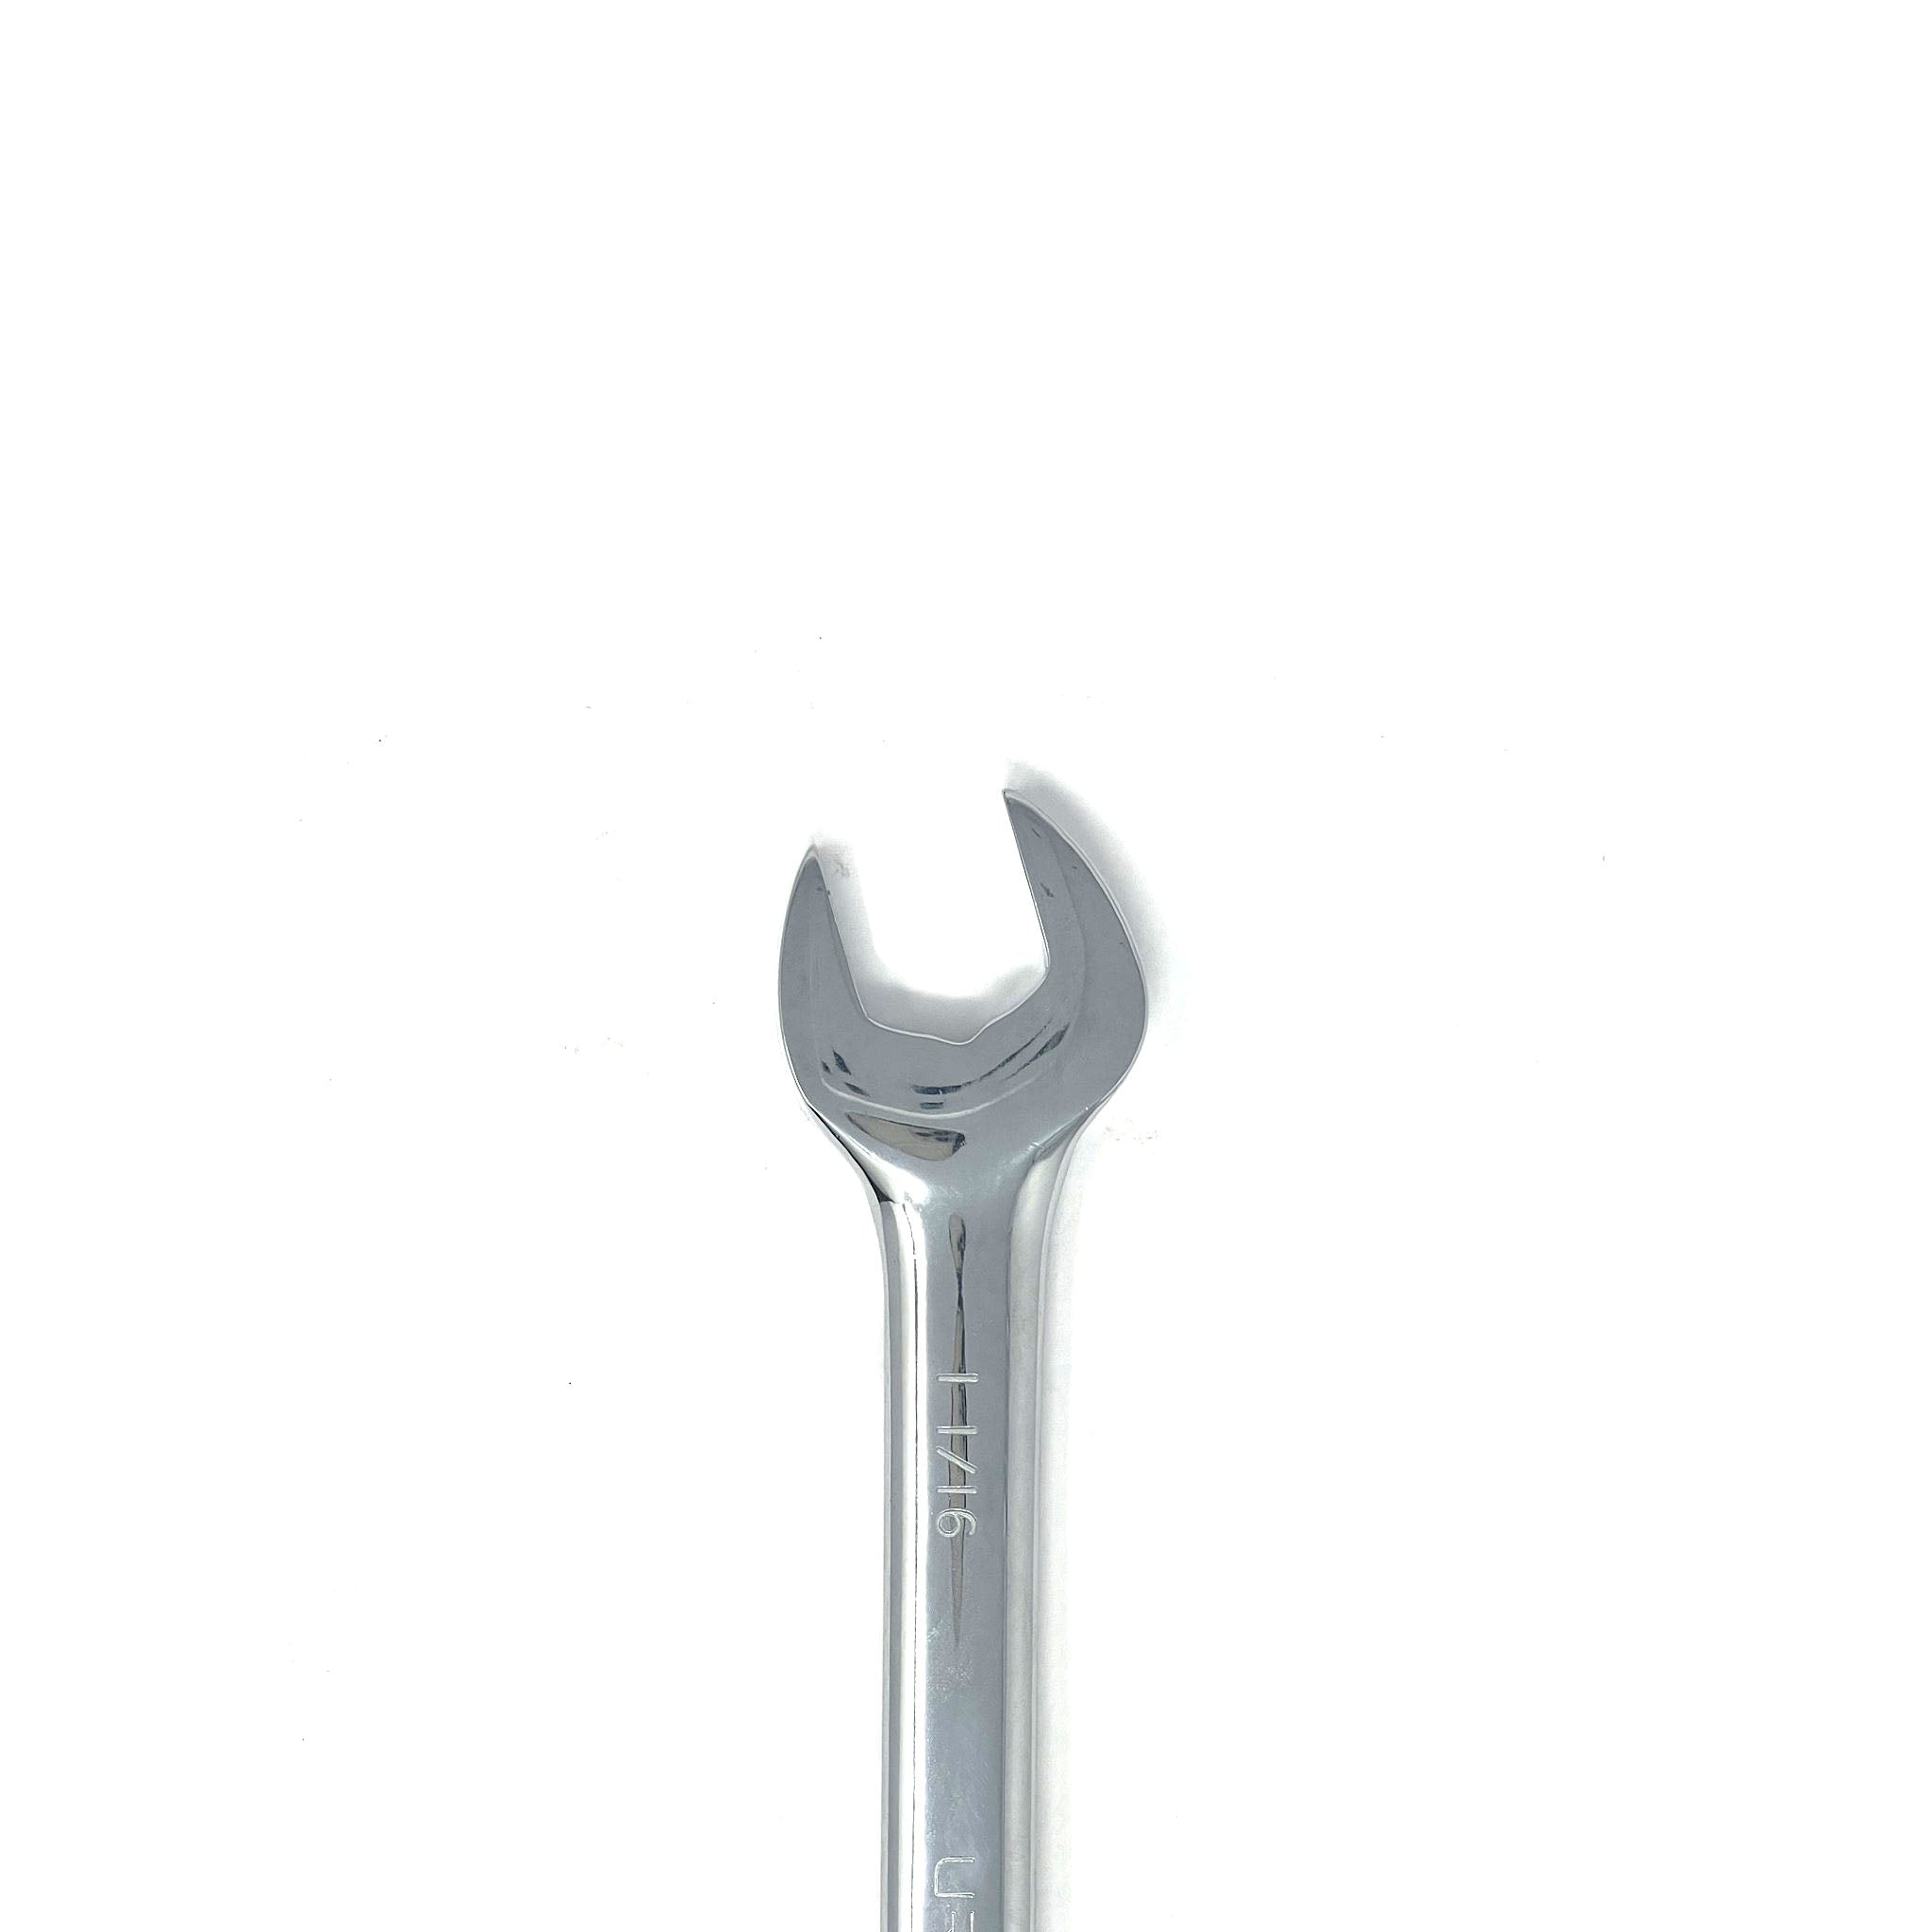 Ammco Standard Wrench 1-1/4" x 1-1/16"